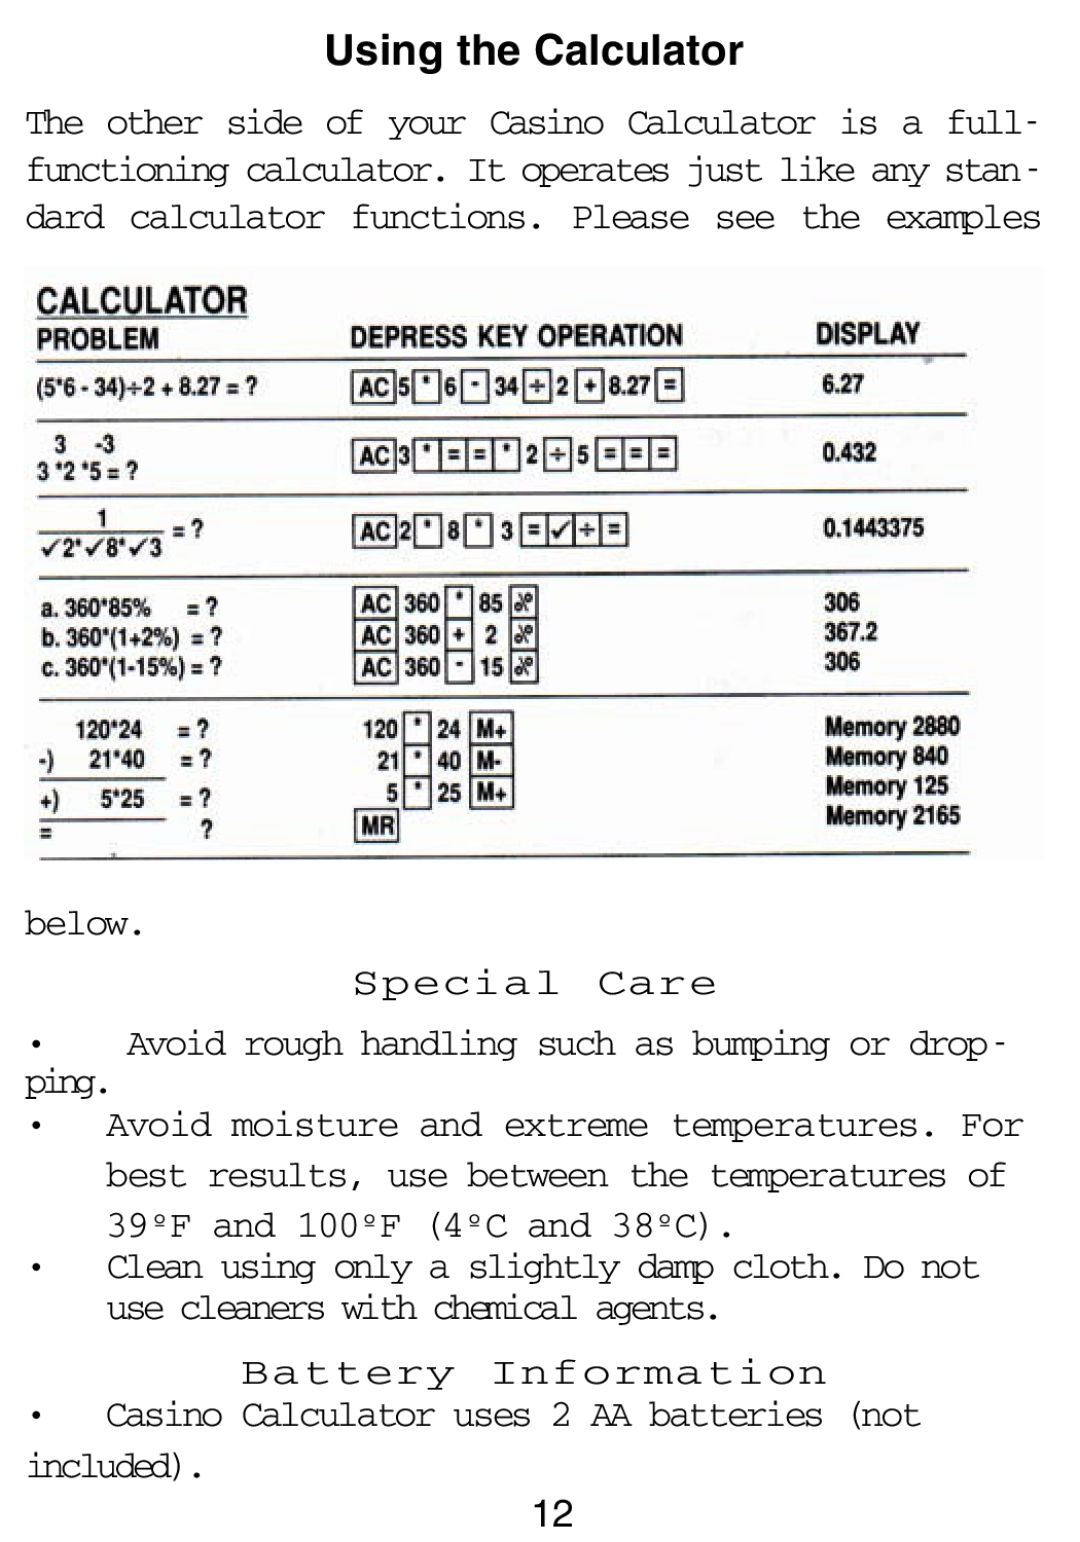 Excalibur electronic 394-P-CS-WSOP manual Using the Calculator, below Special Care, ping, Battery Information 